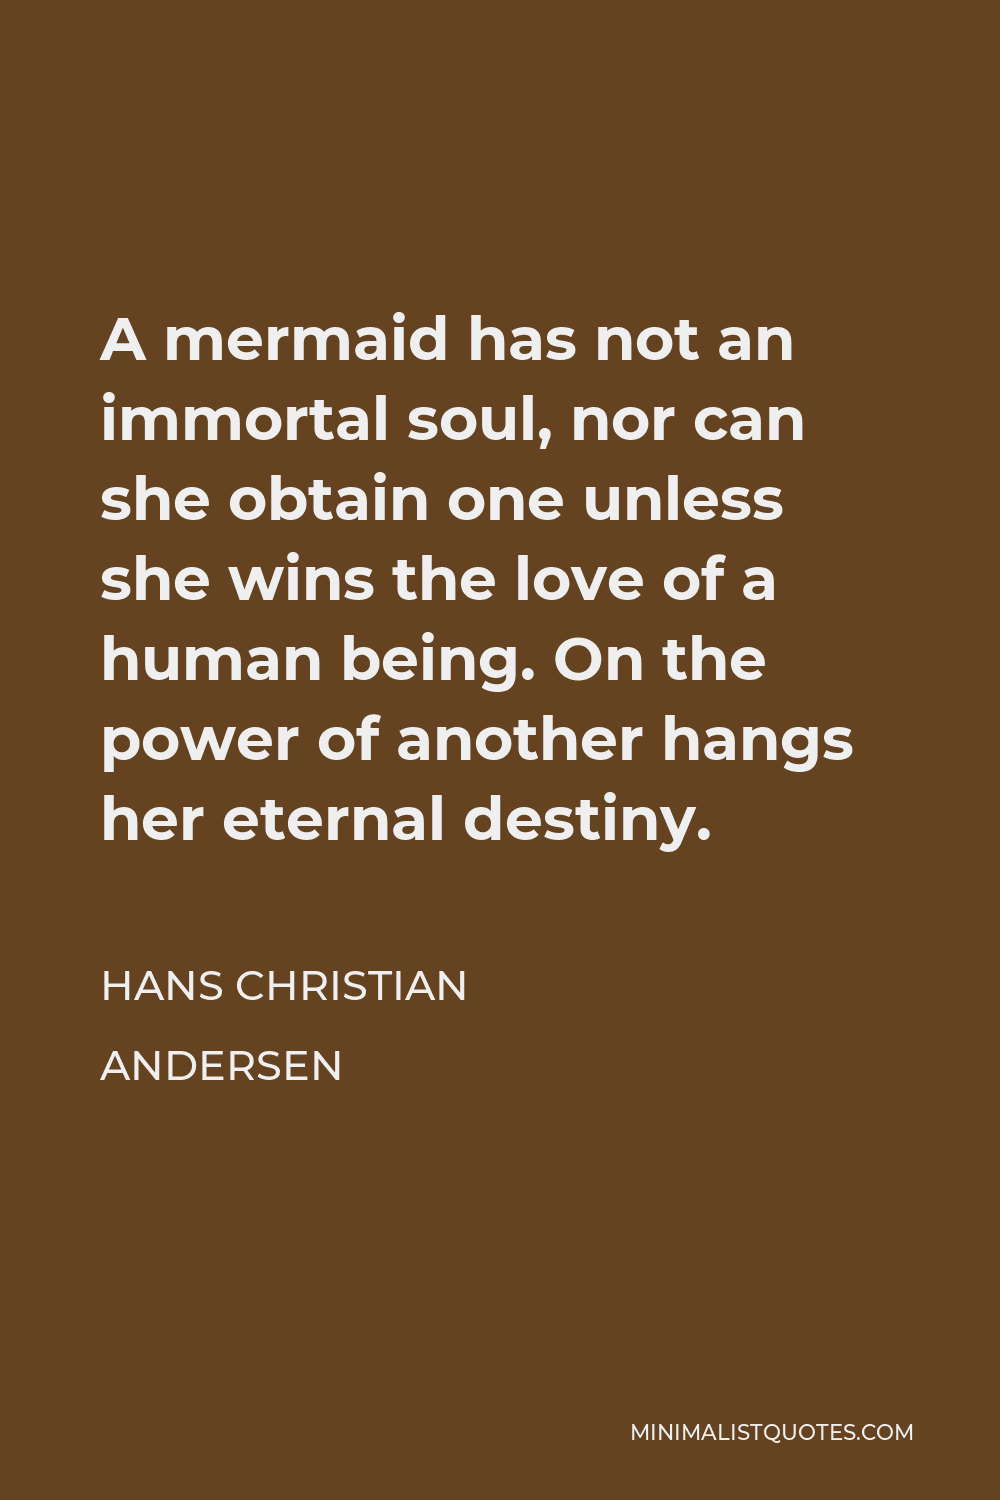 Hans Christian Andersen Quote - A mermaid has not an immortal soul, nor can she obtain one unless she wins the love of a human being. On the power of another hangs her eternal destiny.